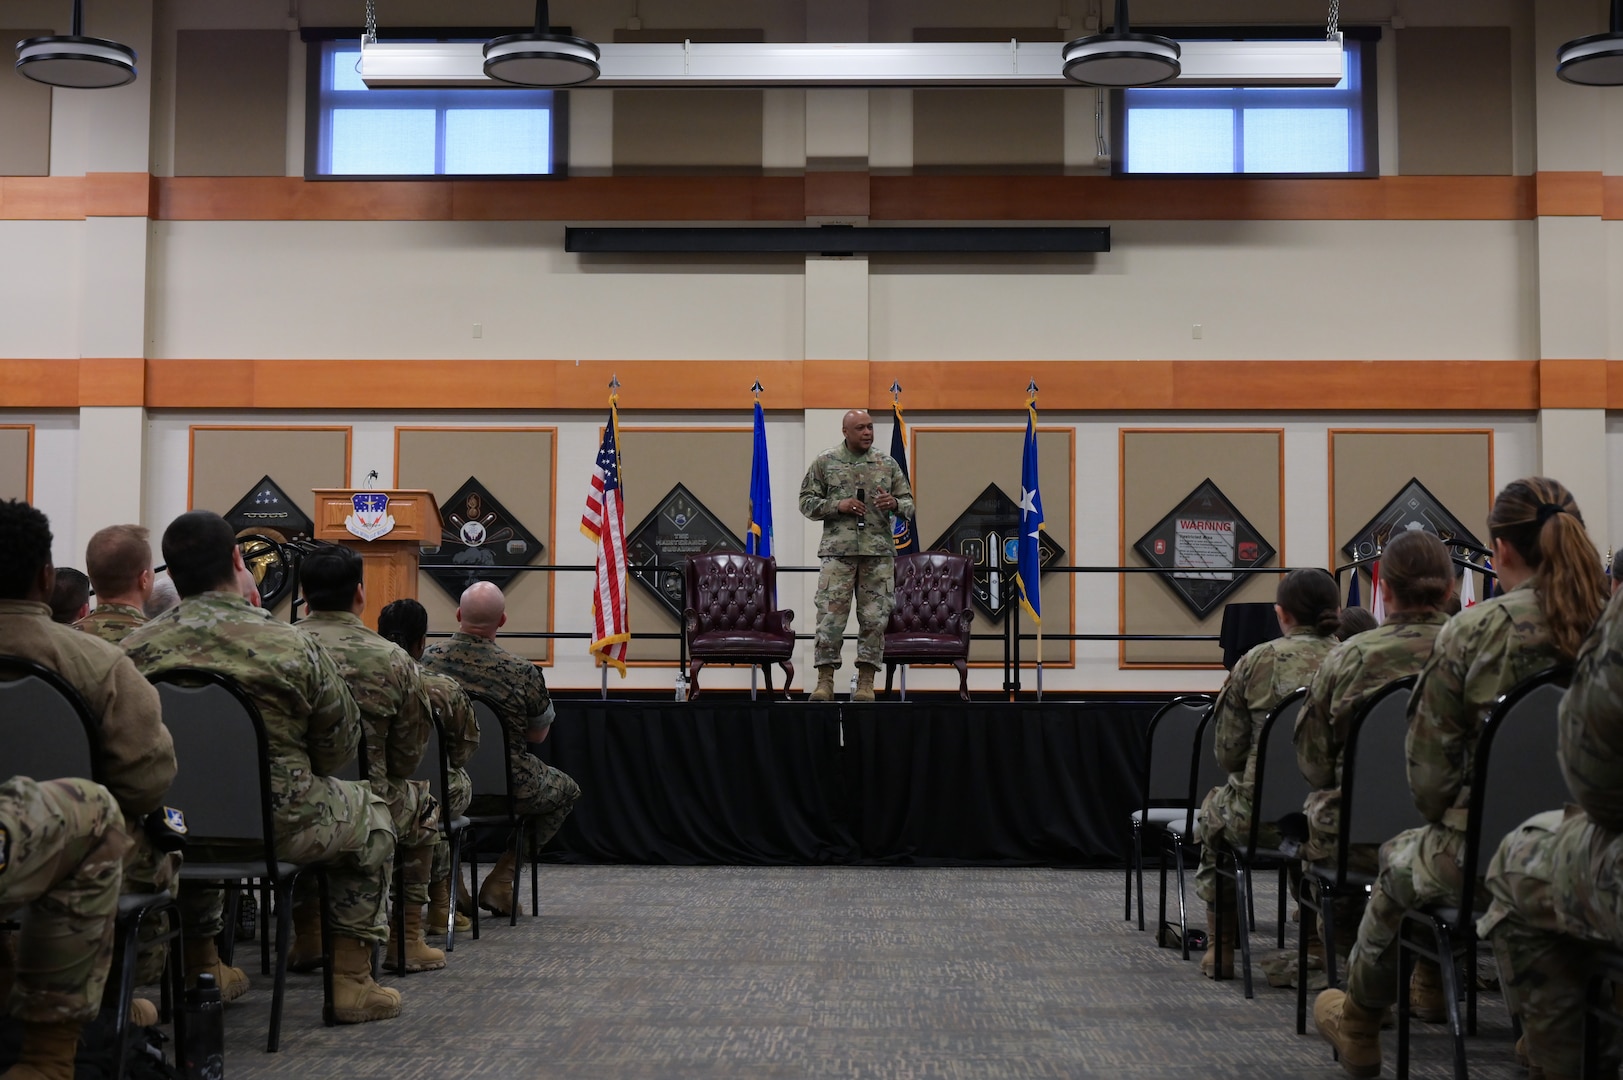 A man in military uniform stands center stage as he speaks to a crowd of military members in front of him.